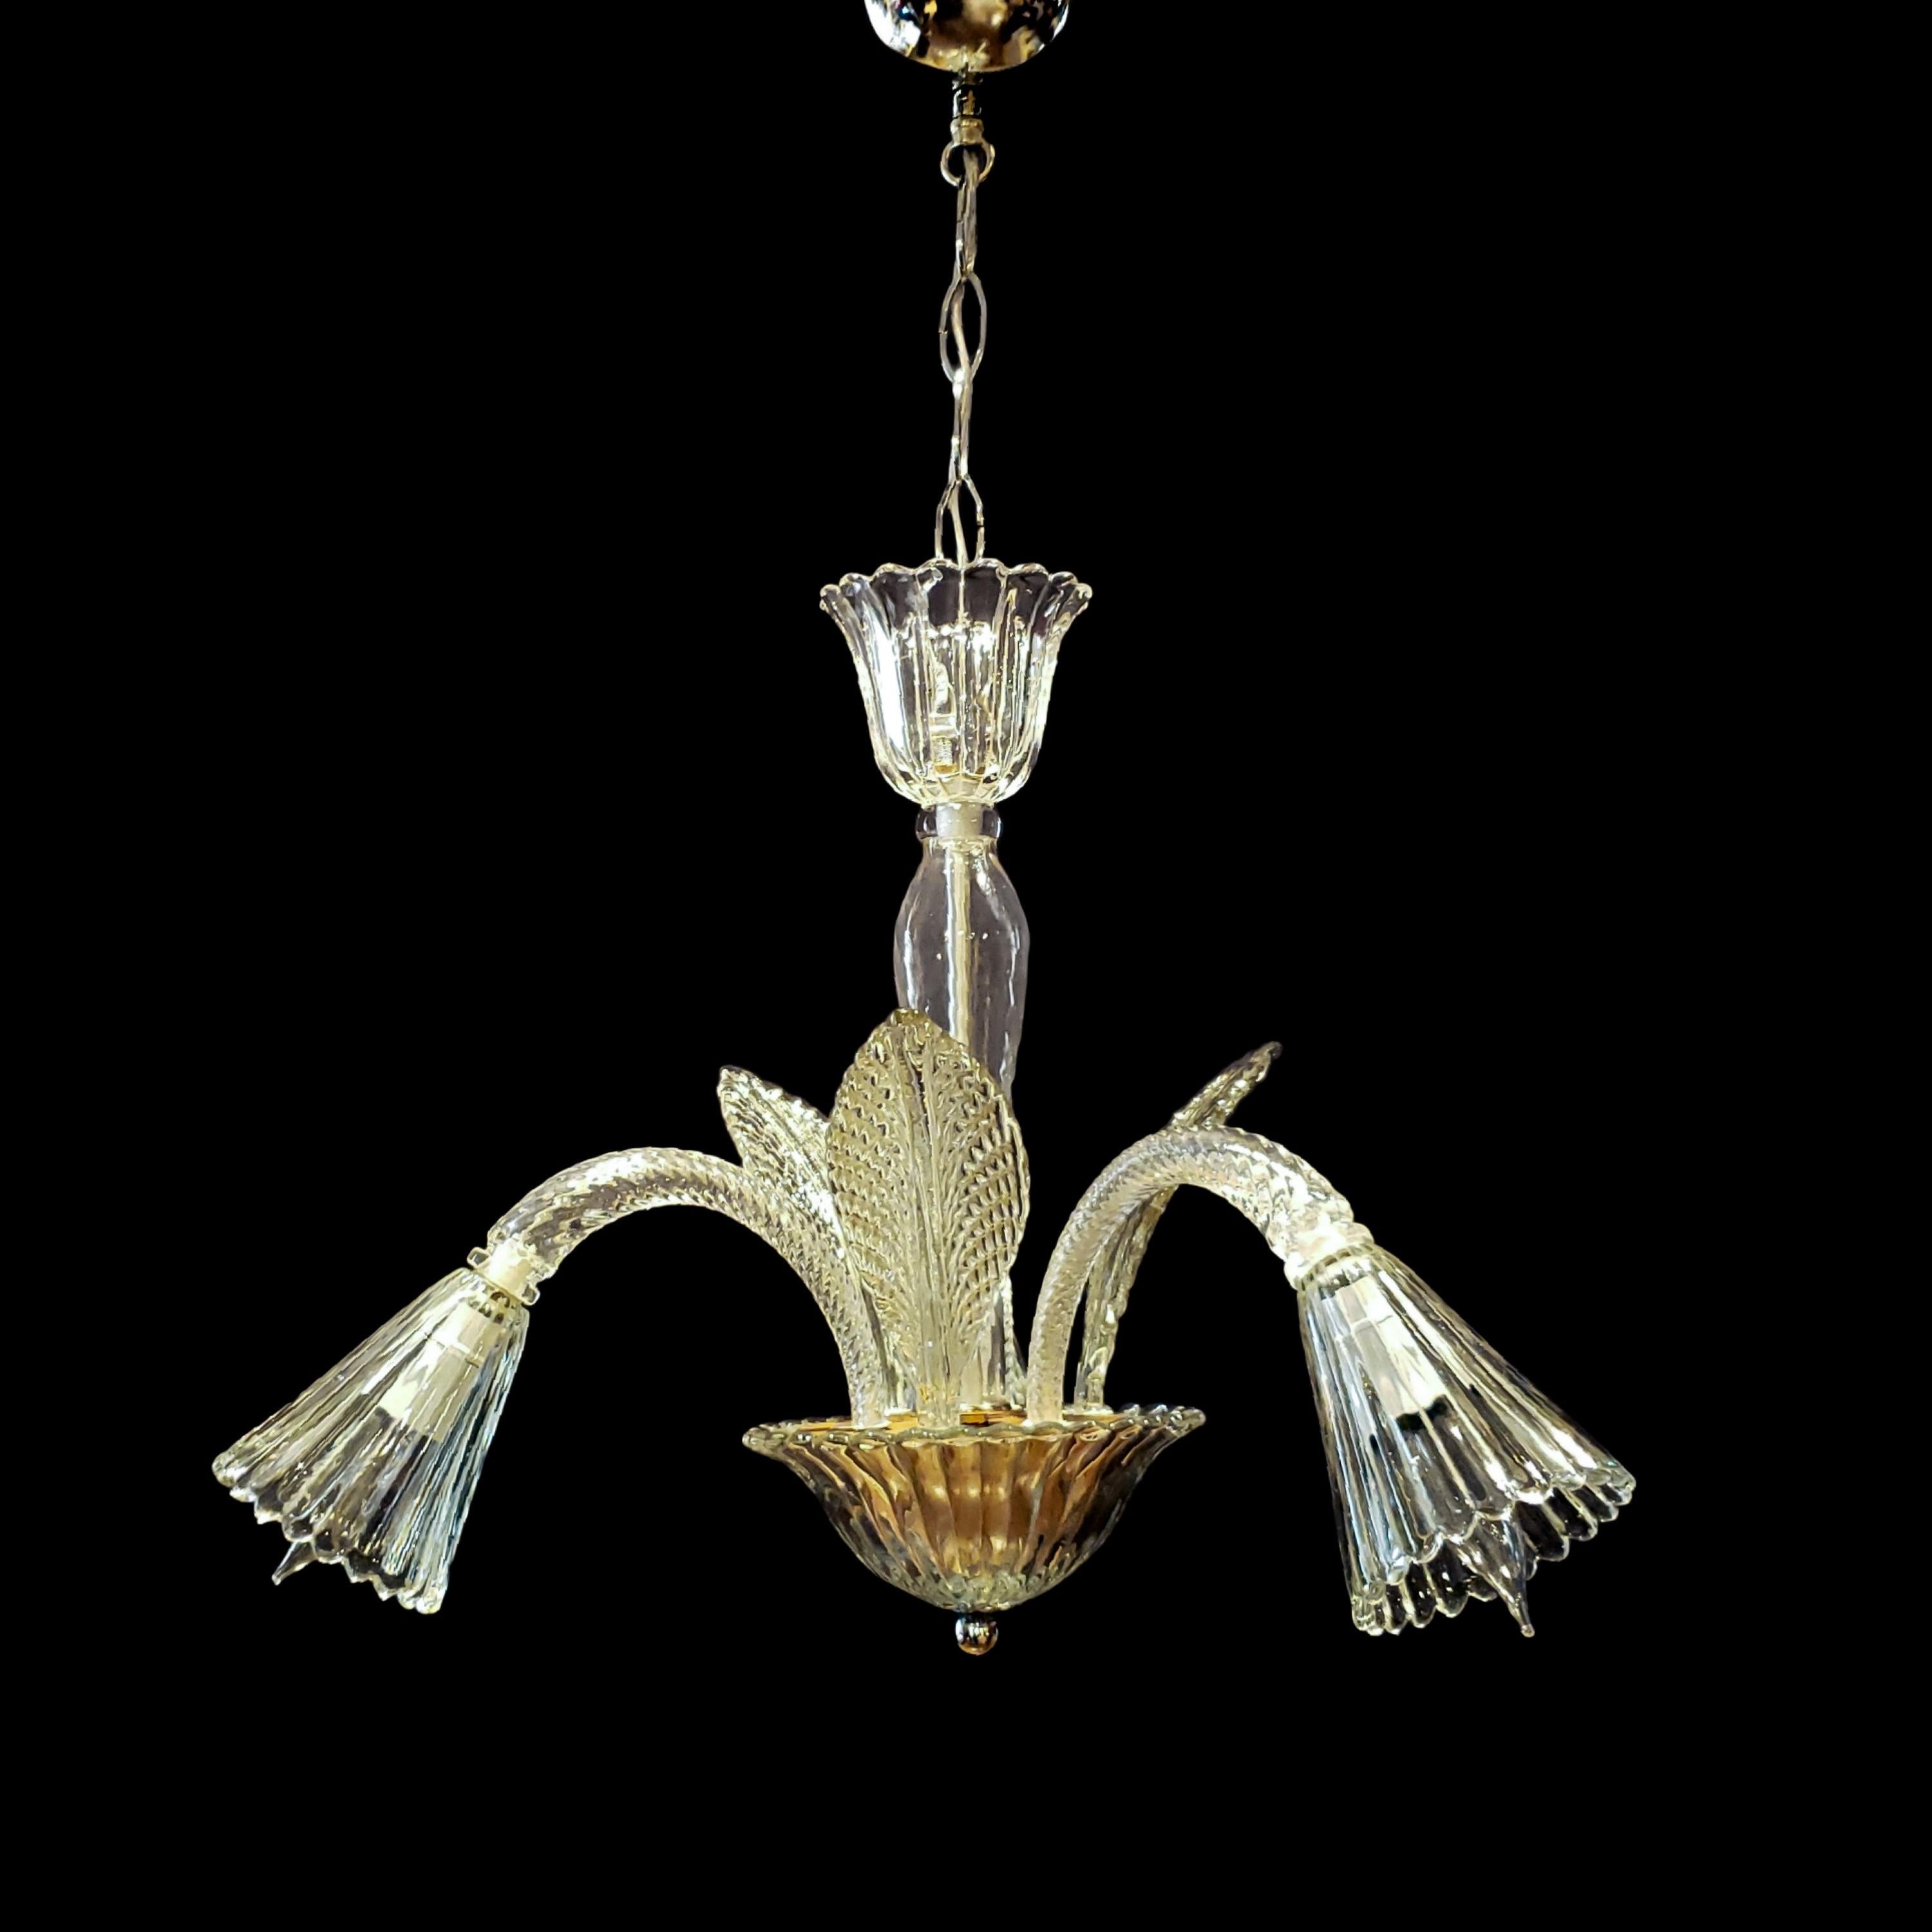 Italian 20th Century chandelier has a clear crystal construction with three arms and three upward leaves. This comes rewired and ready to install. Ships disassembled. Cleaned and restored. Please note, this item is located in our Scranton, PA